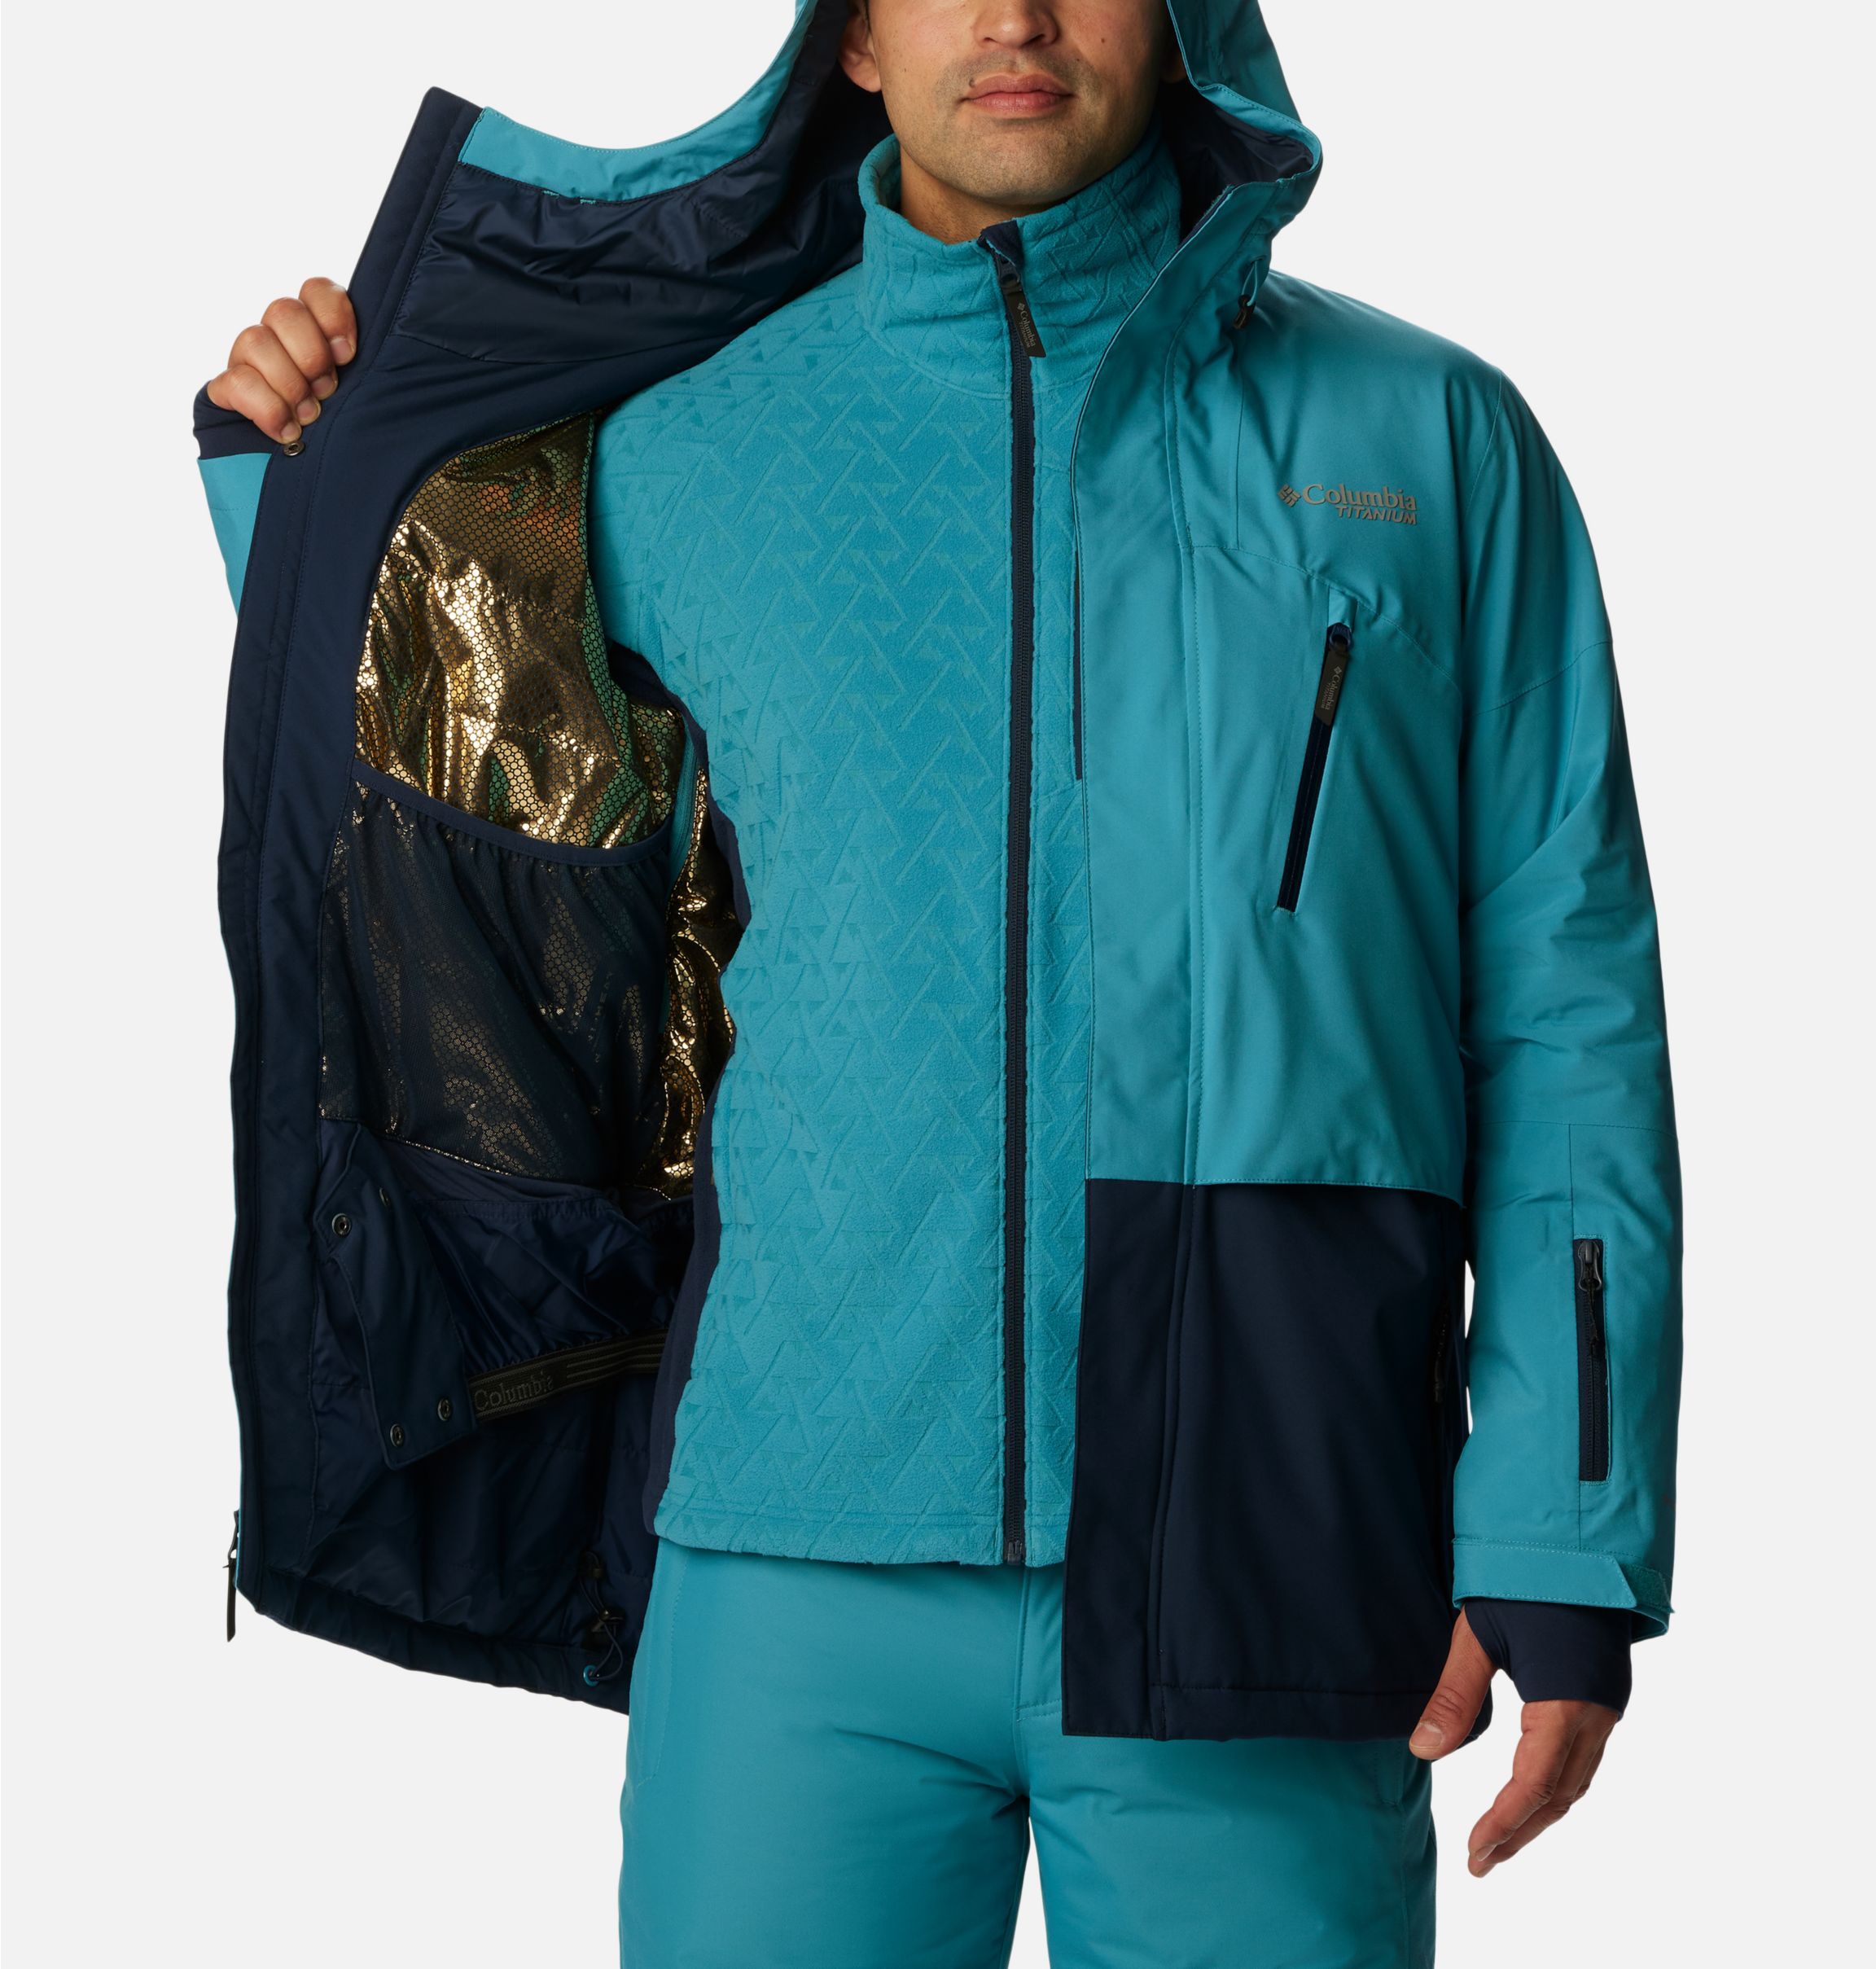 Veste Columbia Aerial Ascender™ II - Homme – Sports Excellence